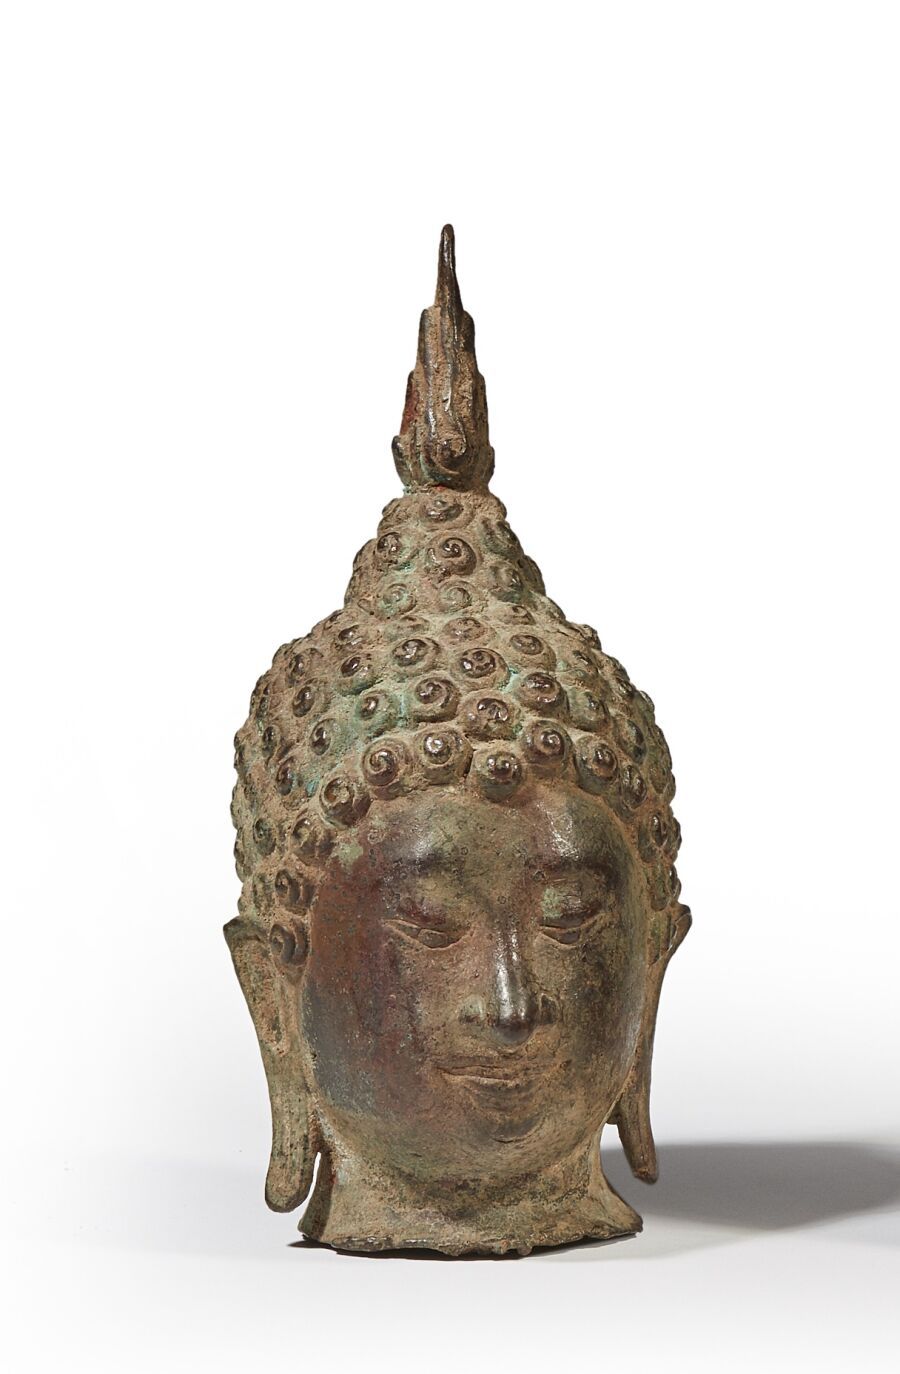 THAILAND - Sukhothai style Buddha head in bronze with green patina, eyes  half closed and smiling, hair forming curls surmounted by the usnisa.  Height Height : 20,5 cm